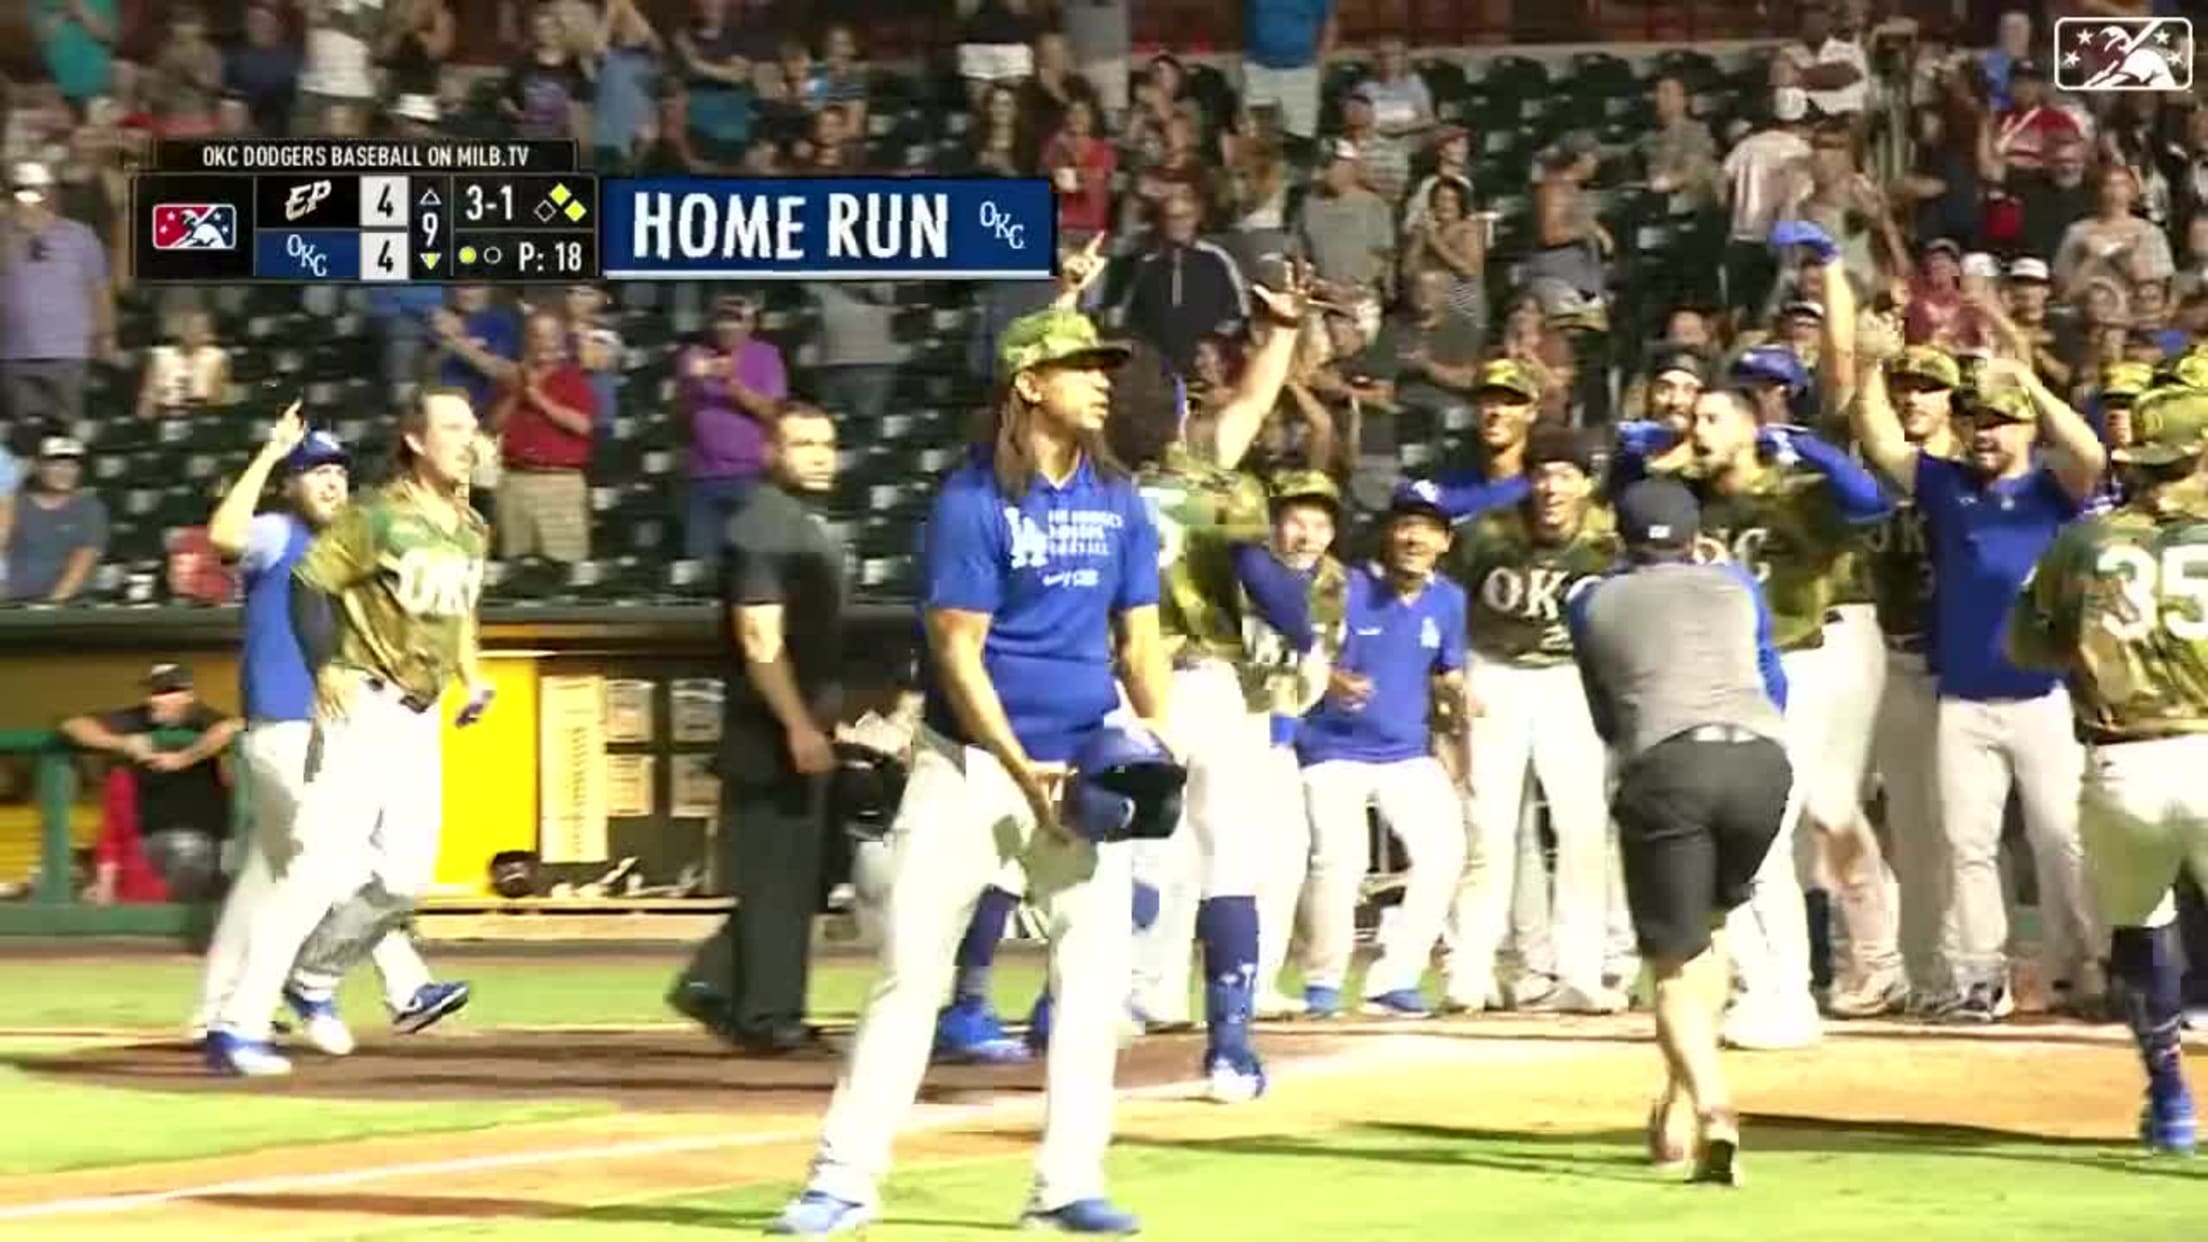 Outman's walk-off HR seals cycle